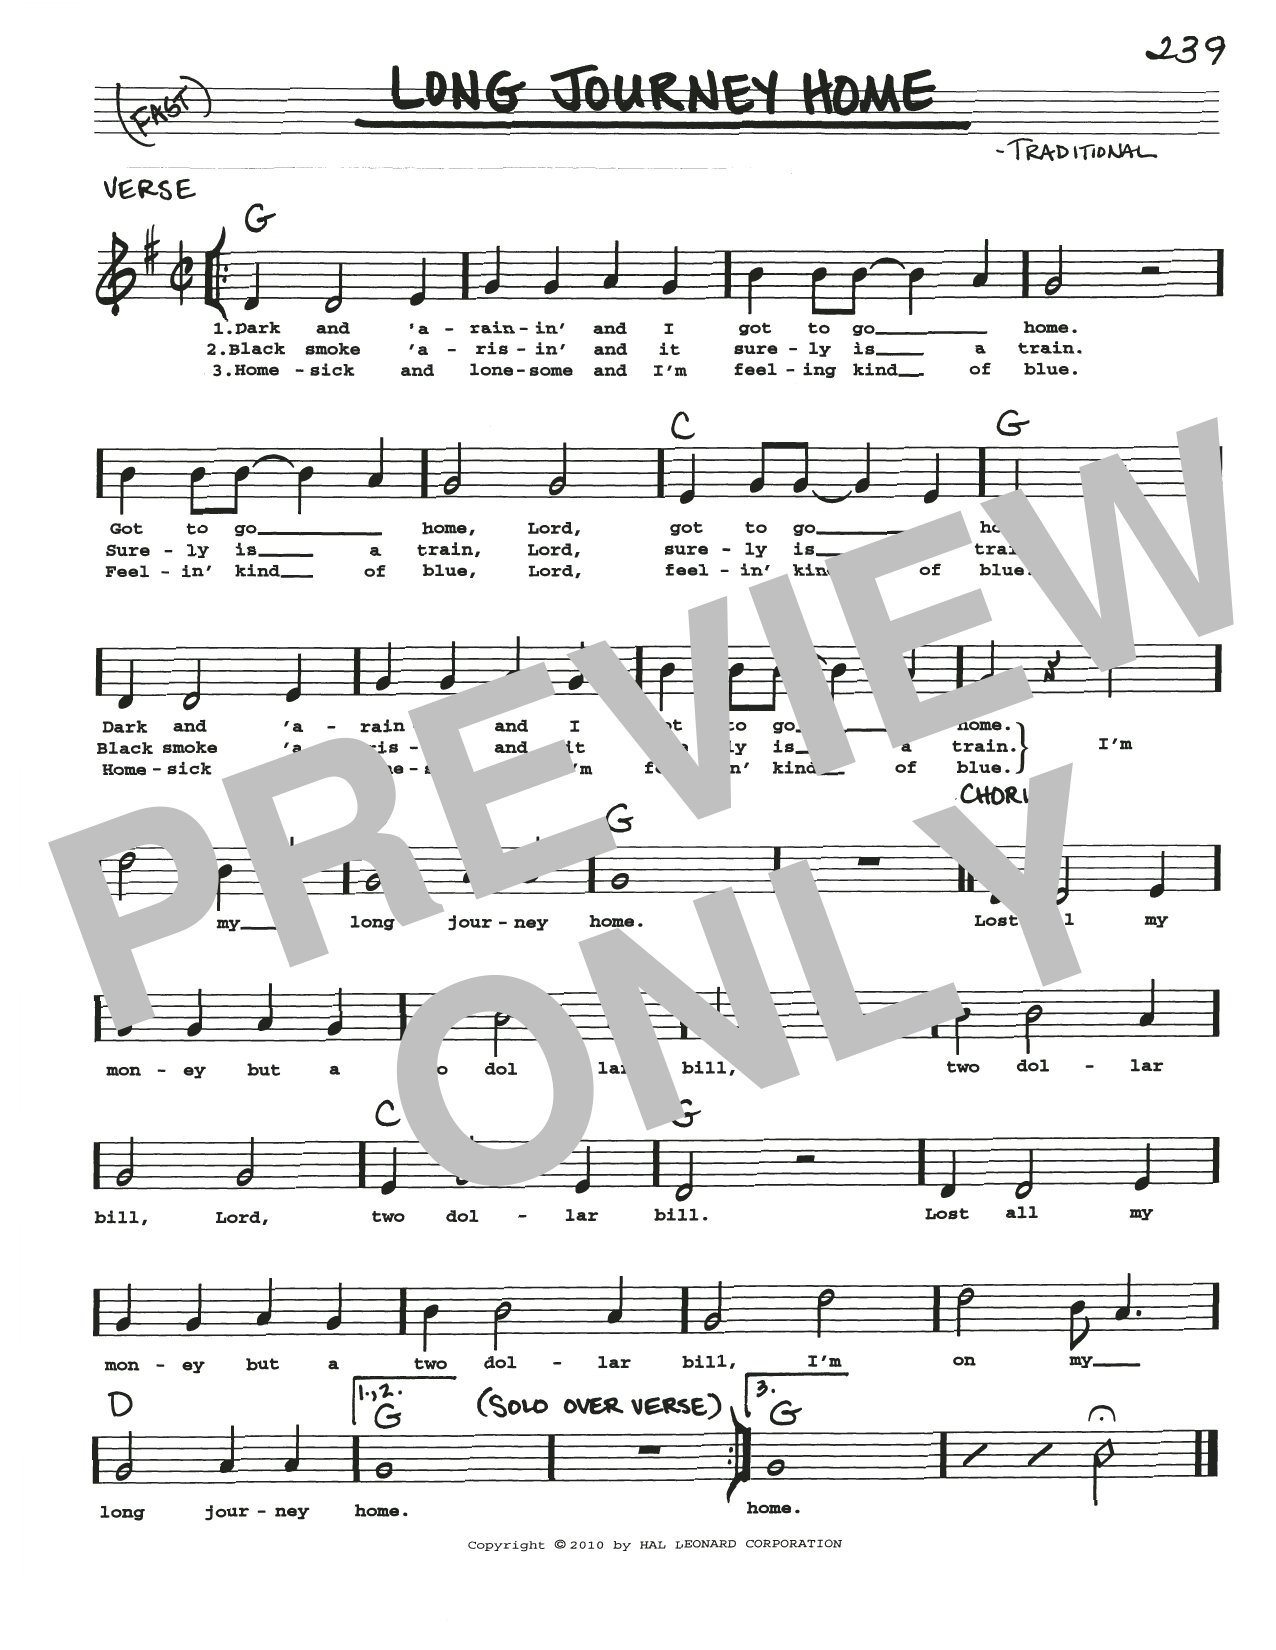 Download Traditional Long Journey Home Sheet Music